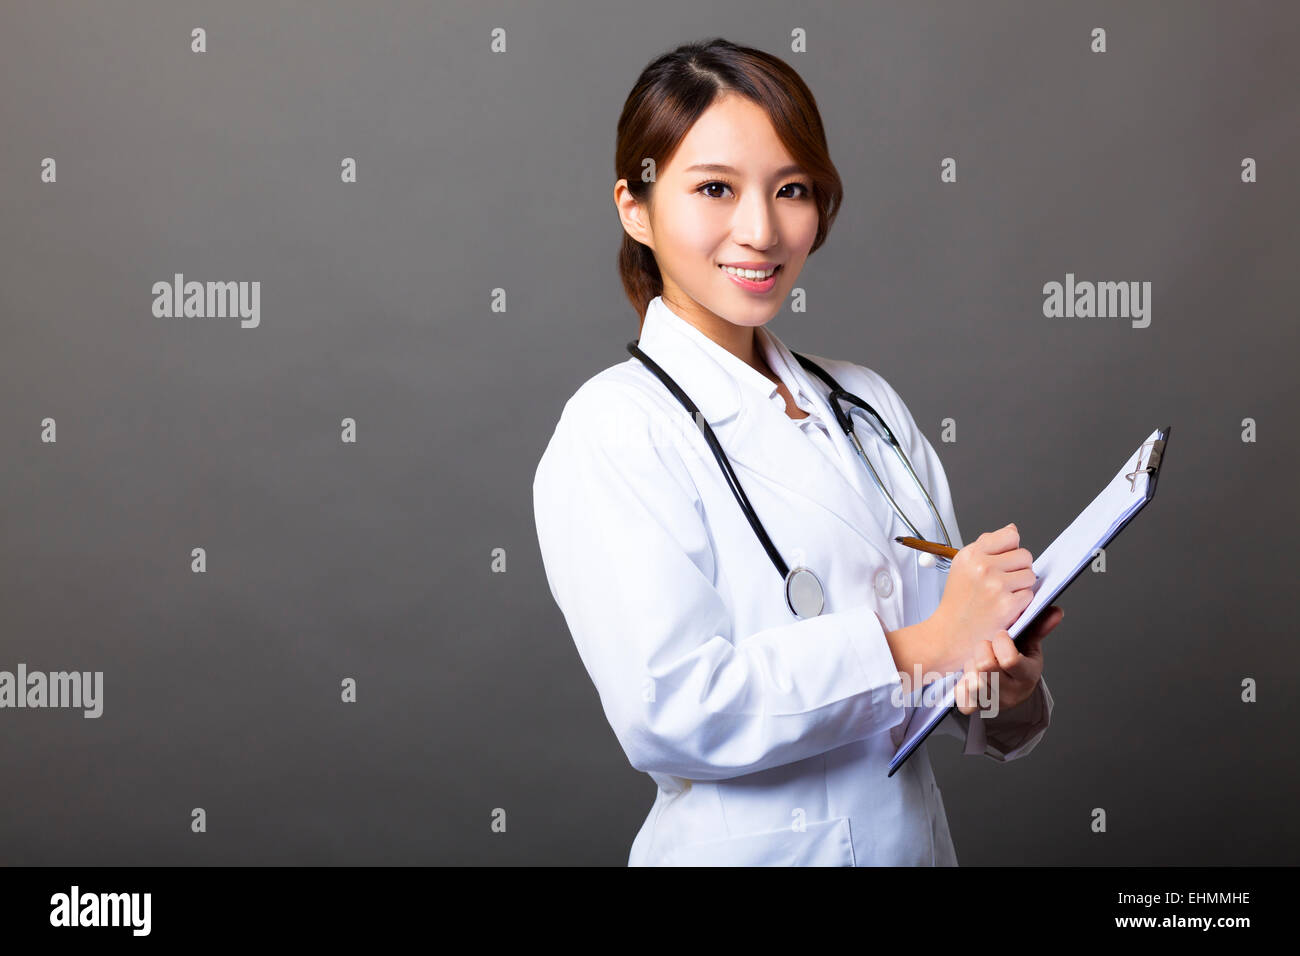 Cheerful female doctor with clipboard Banque D'Images